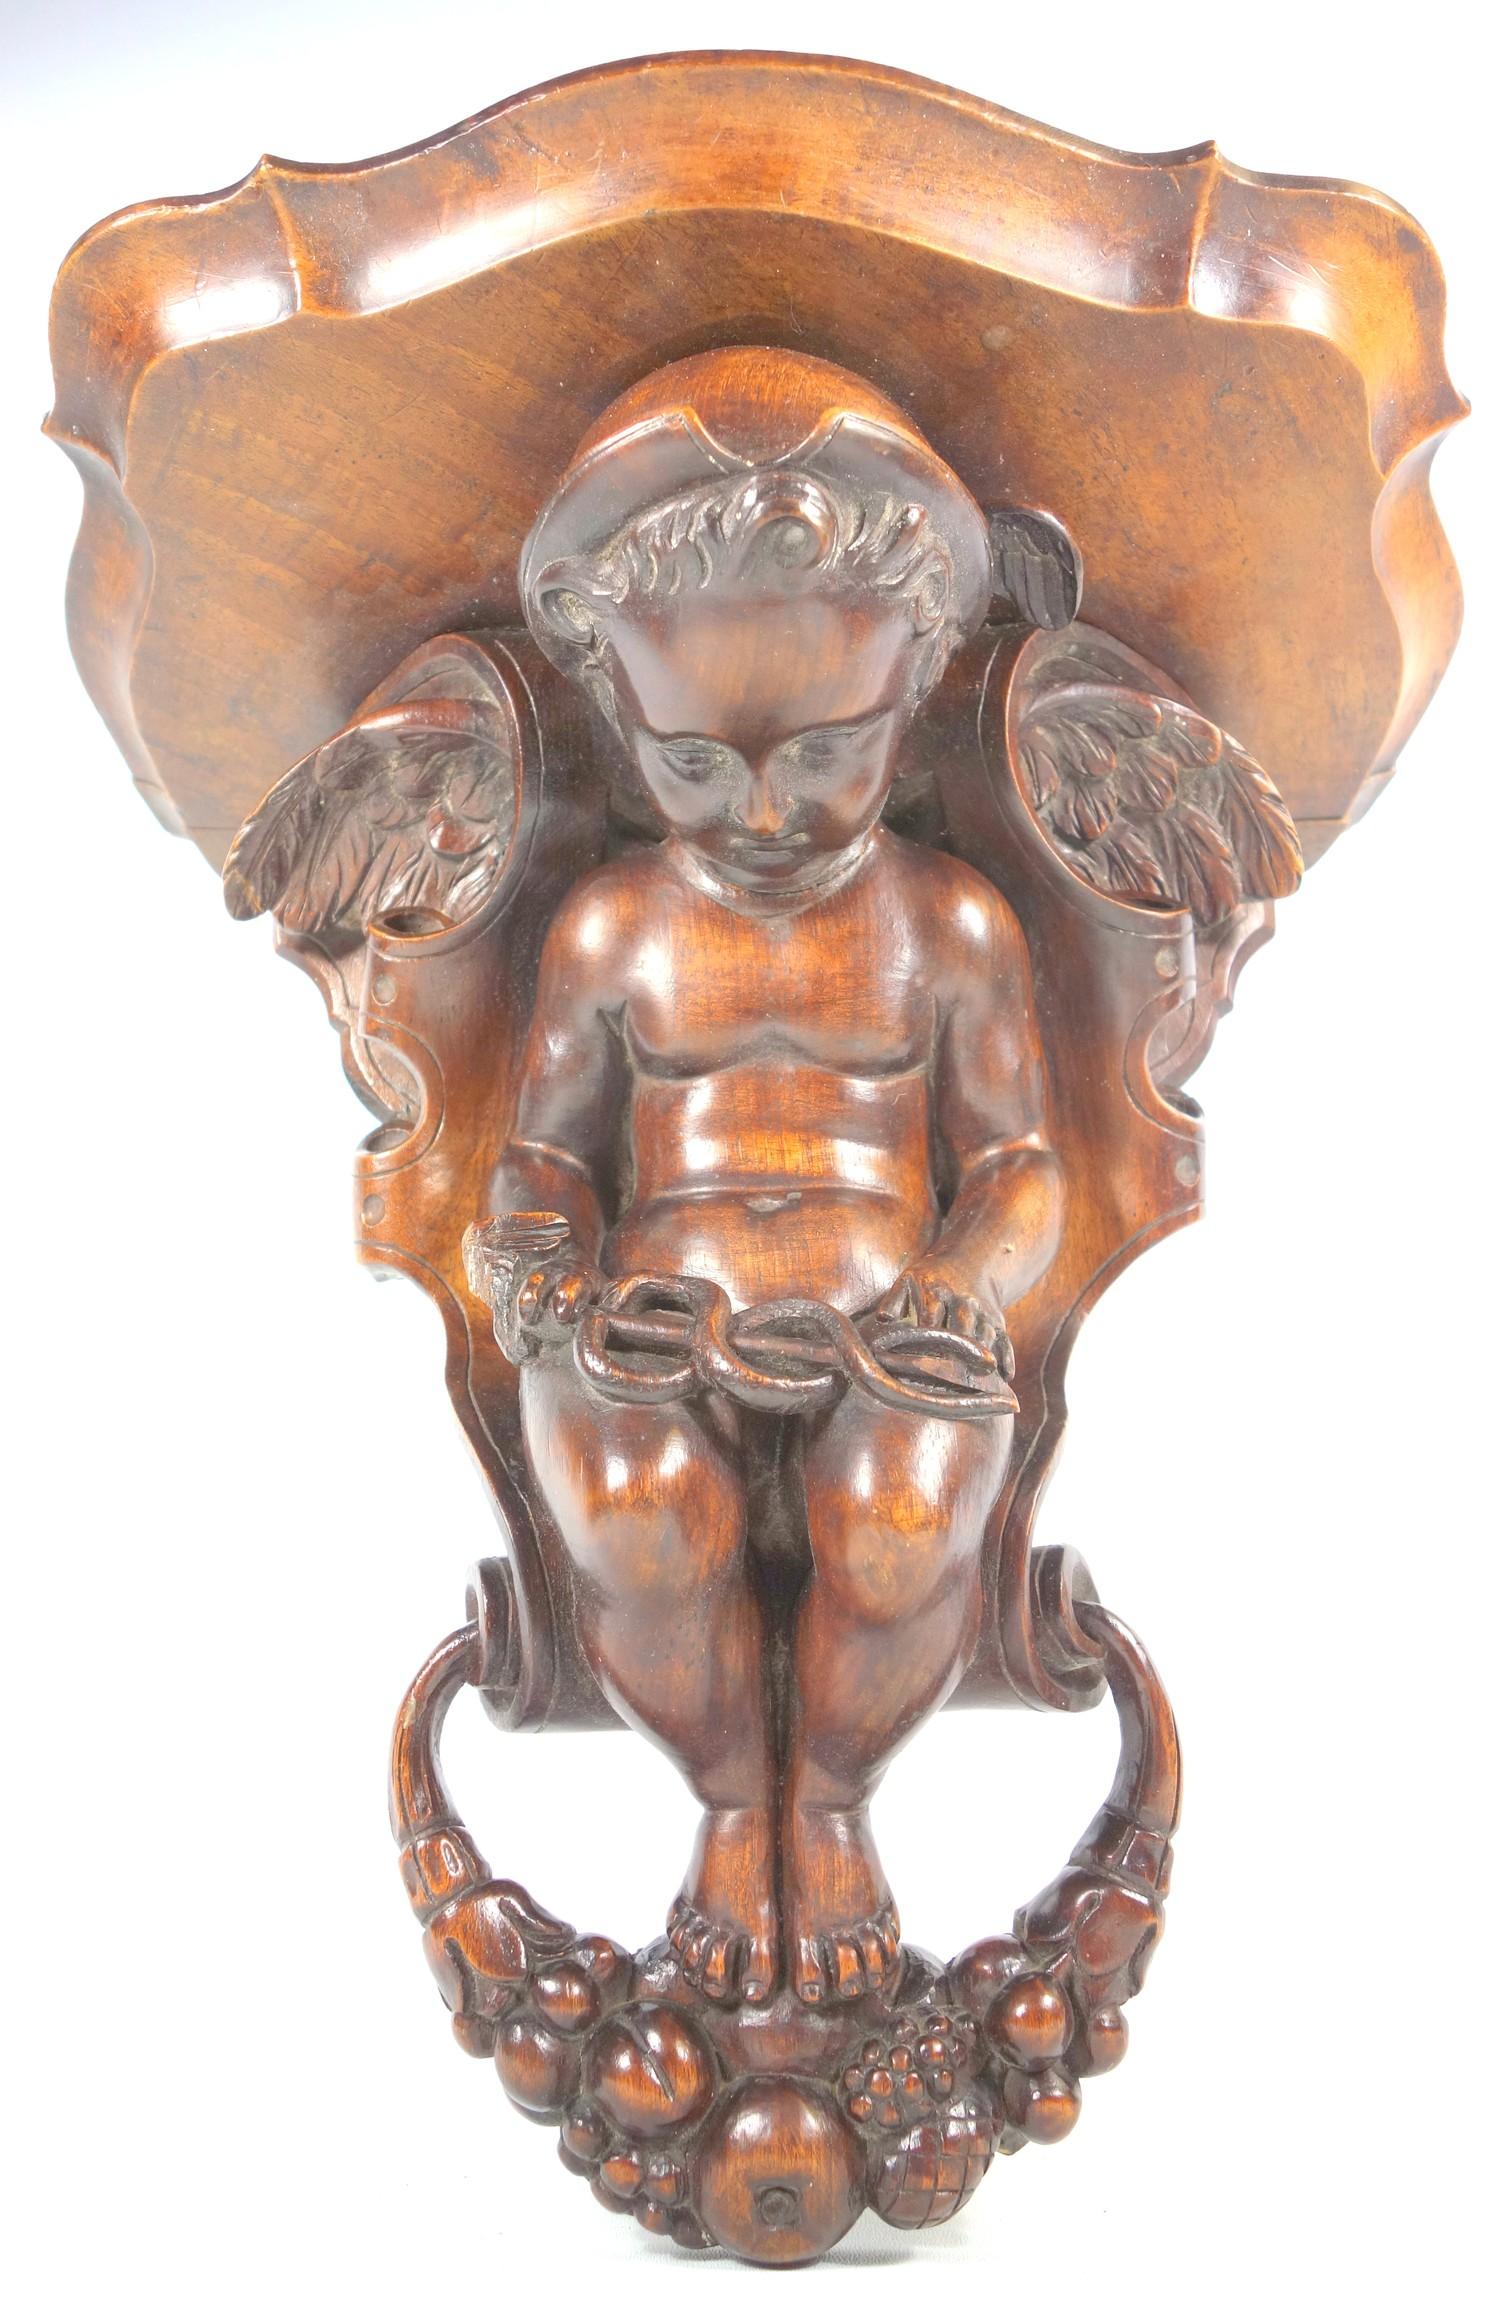 19TH CENTURY ITALIAN CARVED WALNUT WALL BRACKET WITH A FIGURE OF MERCURY SEATED AND HOLDING A - Image 2 of 9